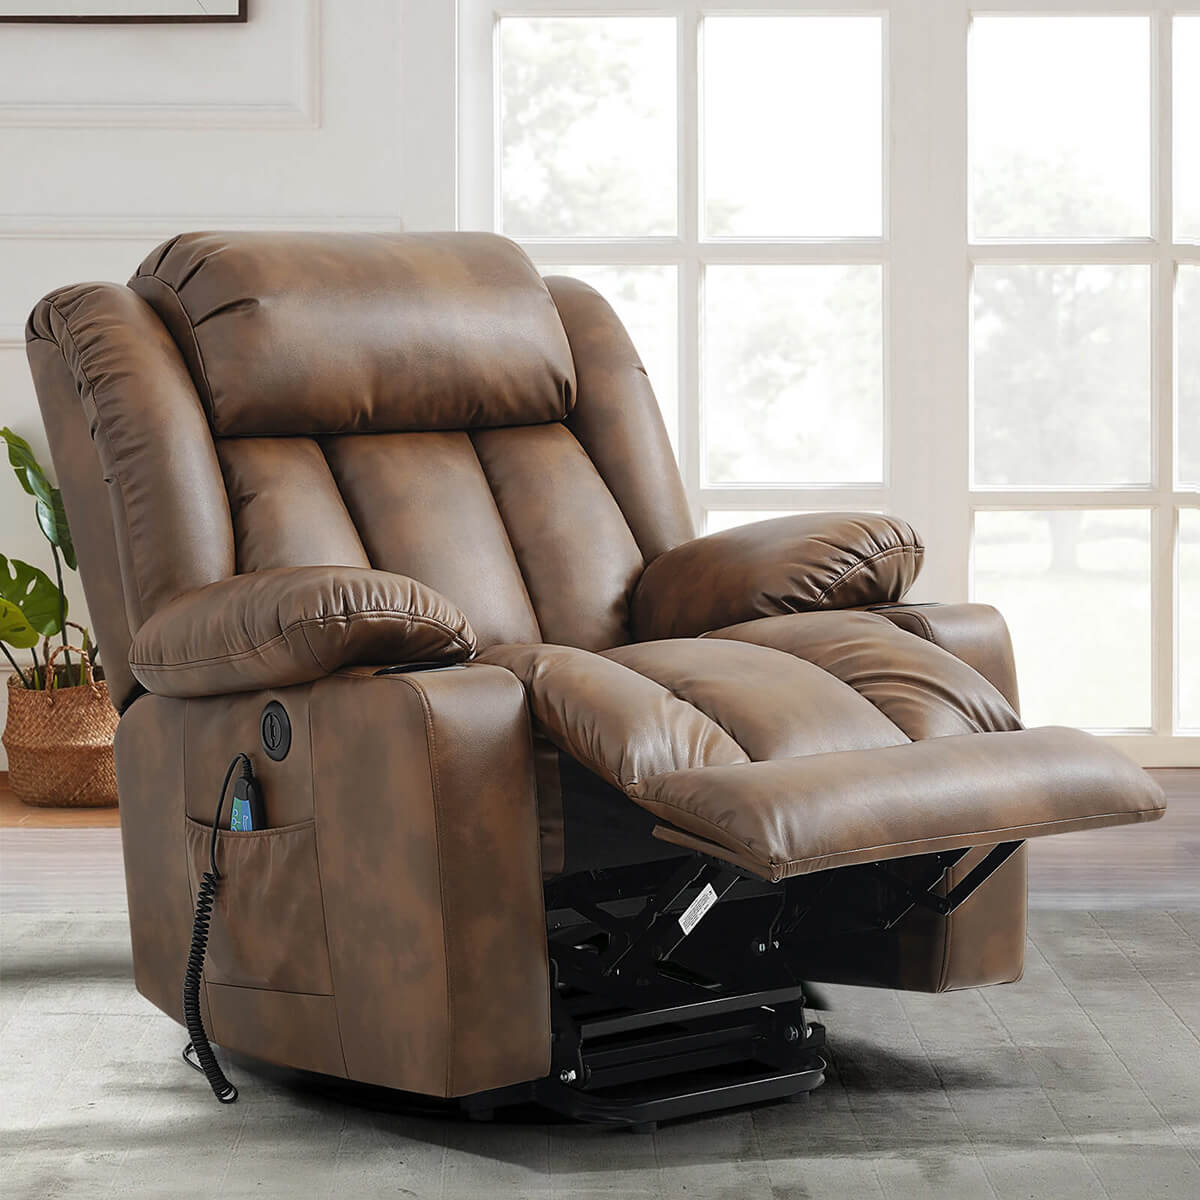 Luxury Lift Recliner Chairs With Massage and Heating, Light Brown